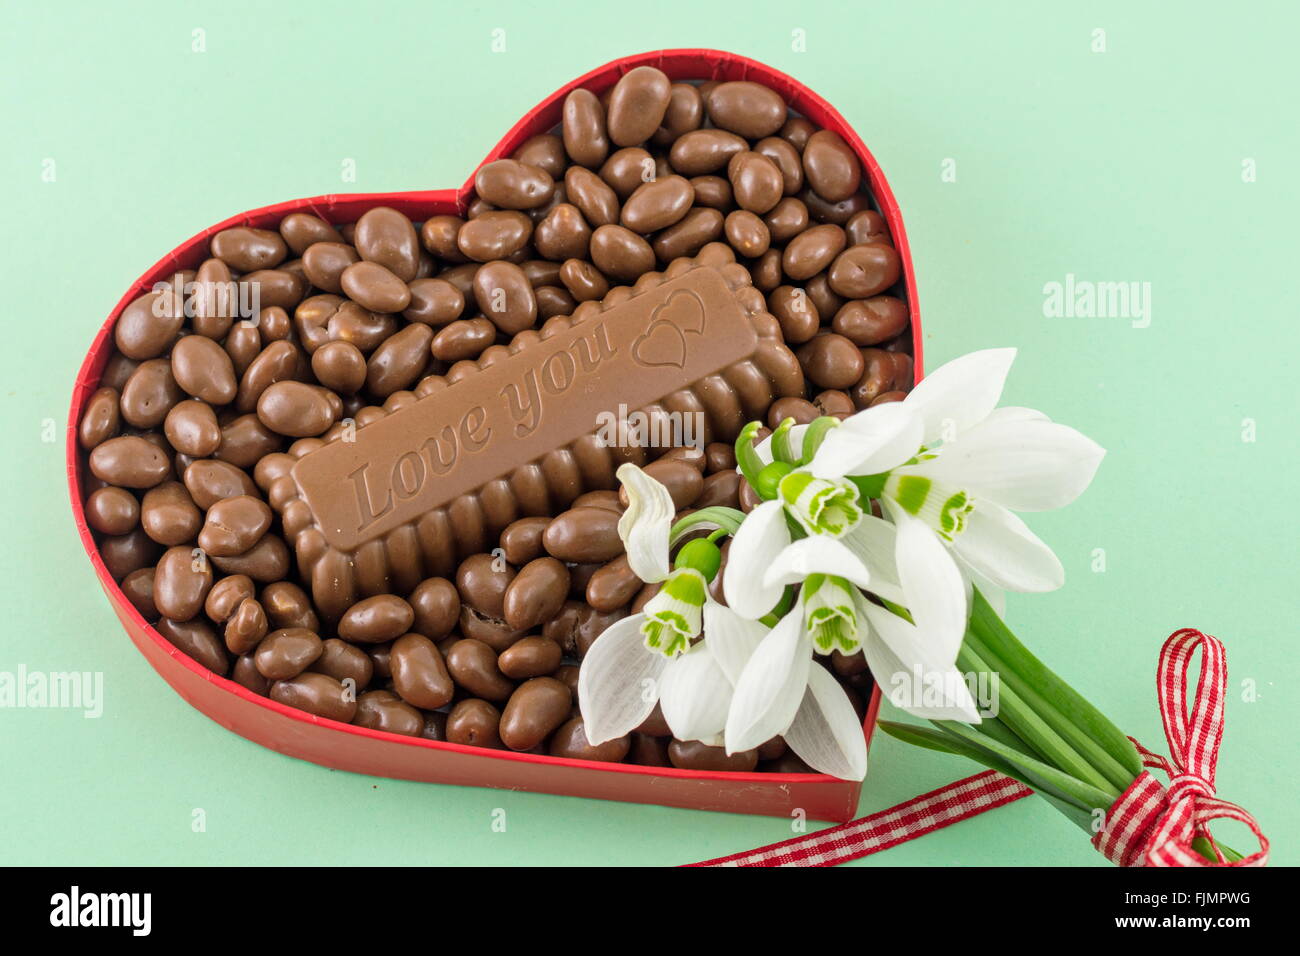 heart shaped box filled with chocolate with an I love you sign Stock Photo